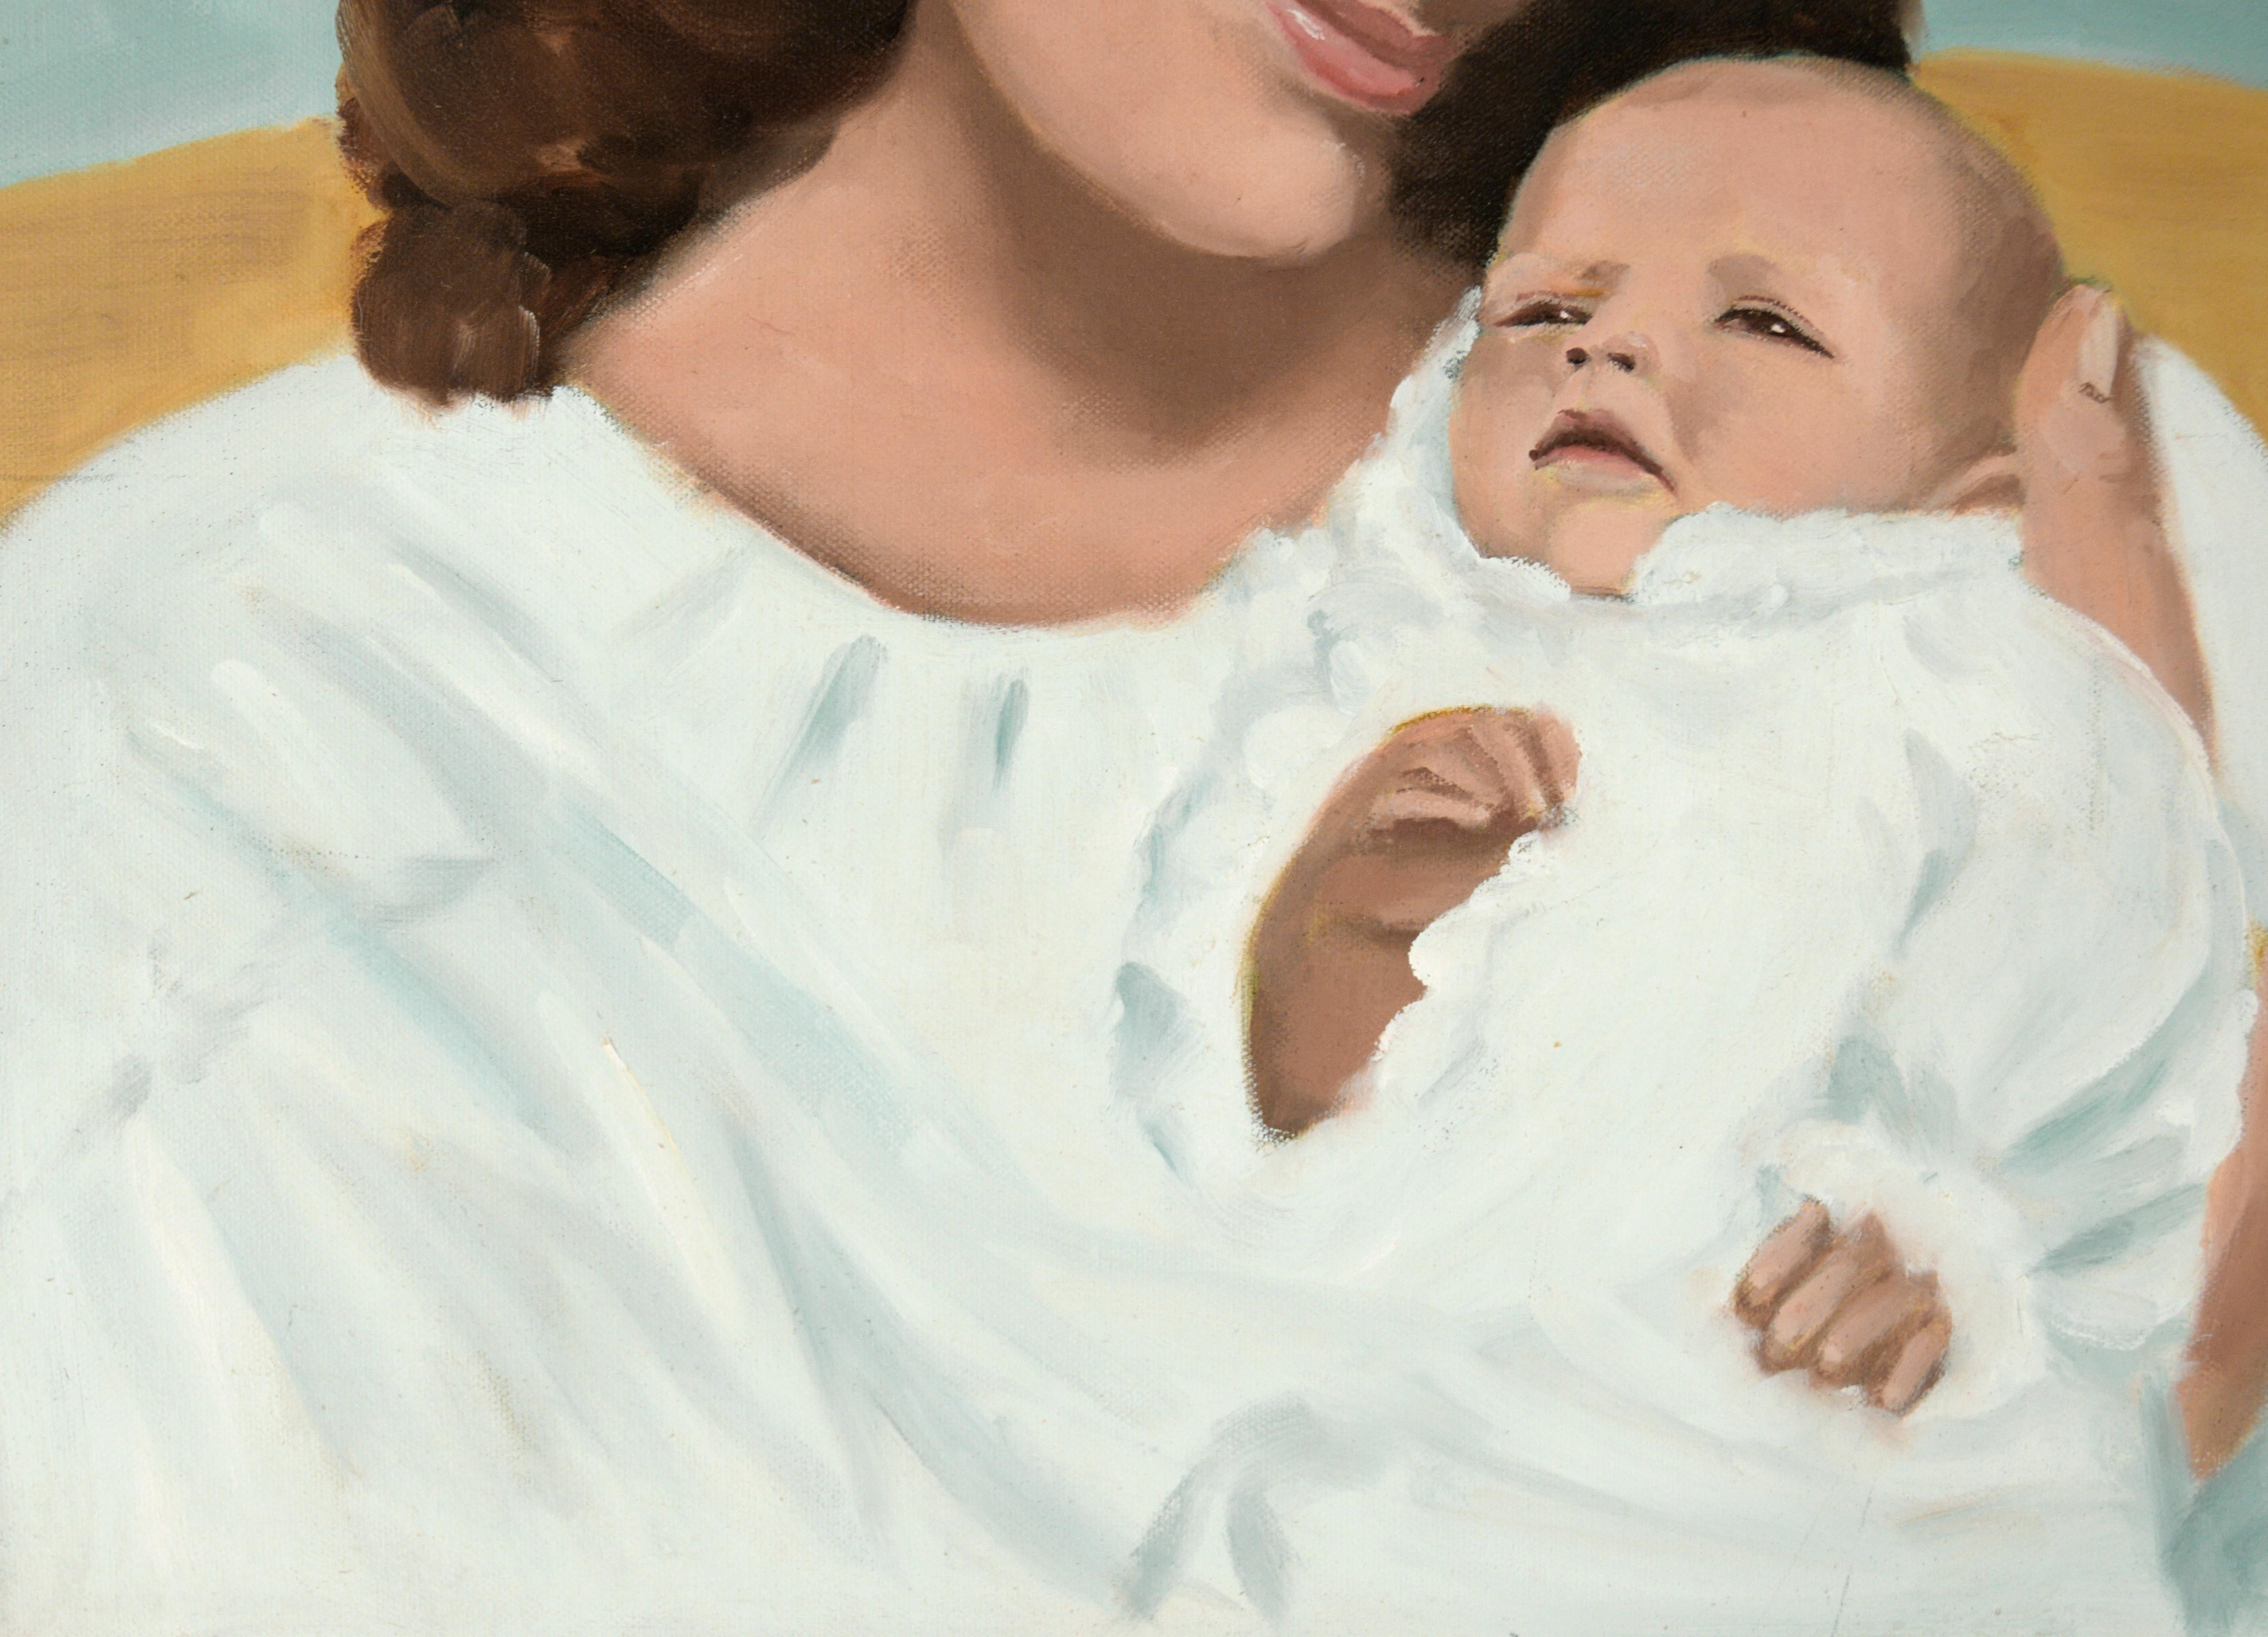 Portrait of a Woman and Infant in White - Oil on Canvas Natalie Wood

Elegant portrait of a woman and her newborn child (*Natalie Wood and Natasha) by Cindy Gin (Cindy Lin) (American, 20th Century). A woman with dark brown hair looks down at her